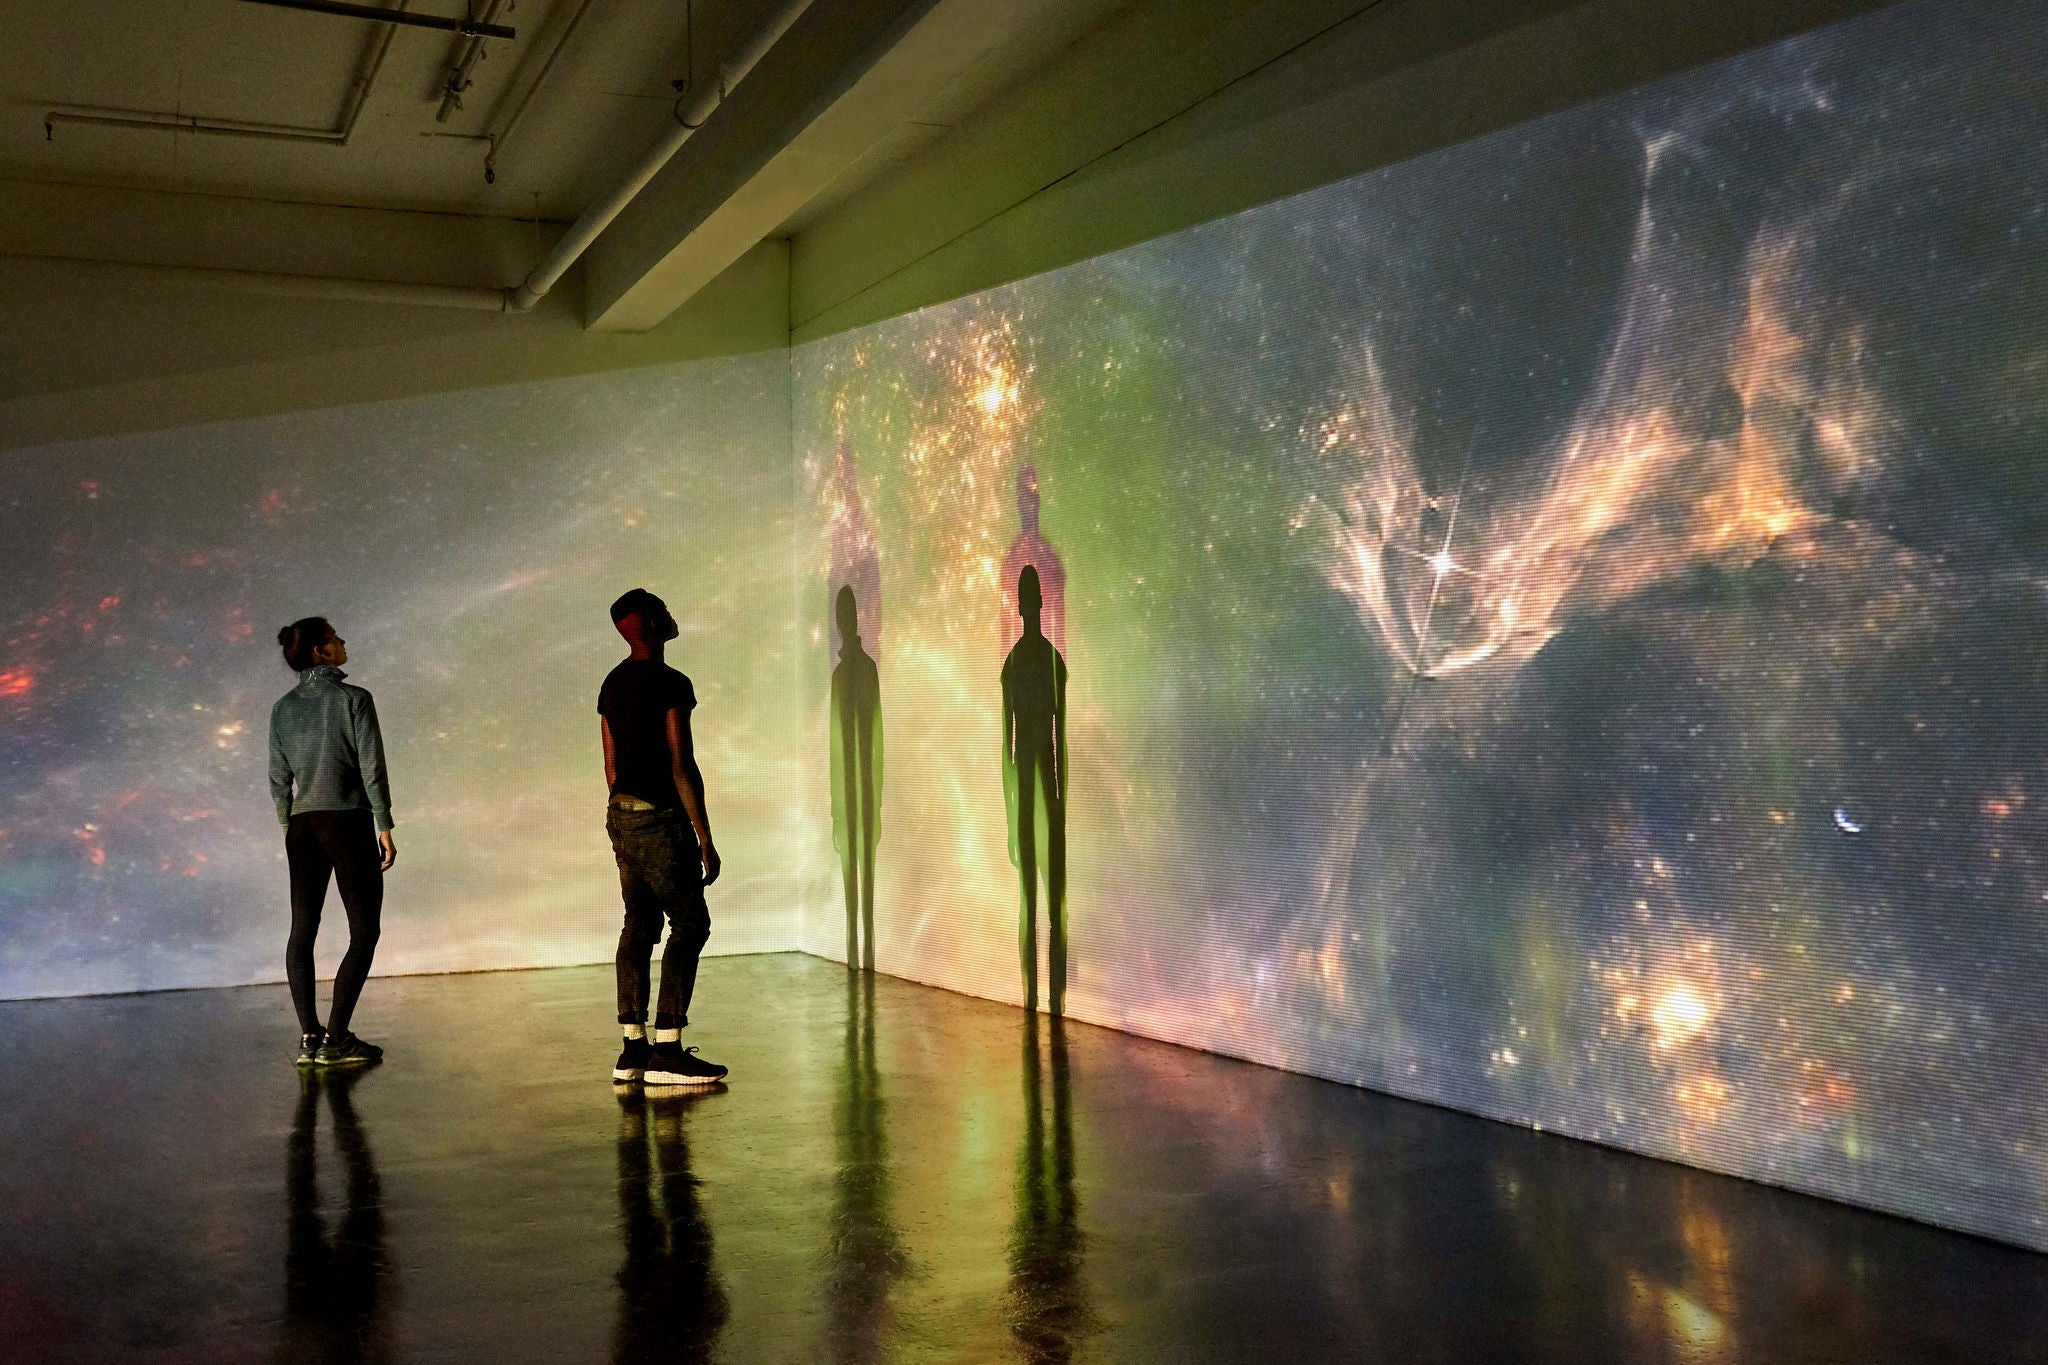 Couple Looking at Large Scale Projected Image of Space